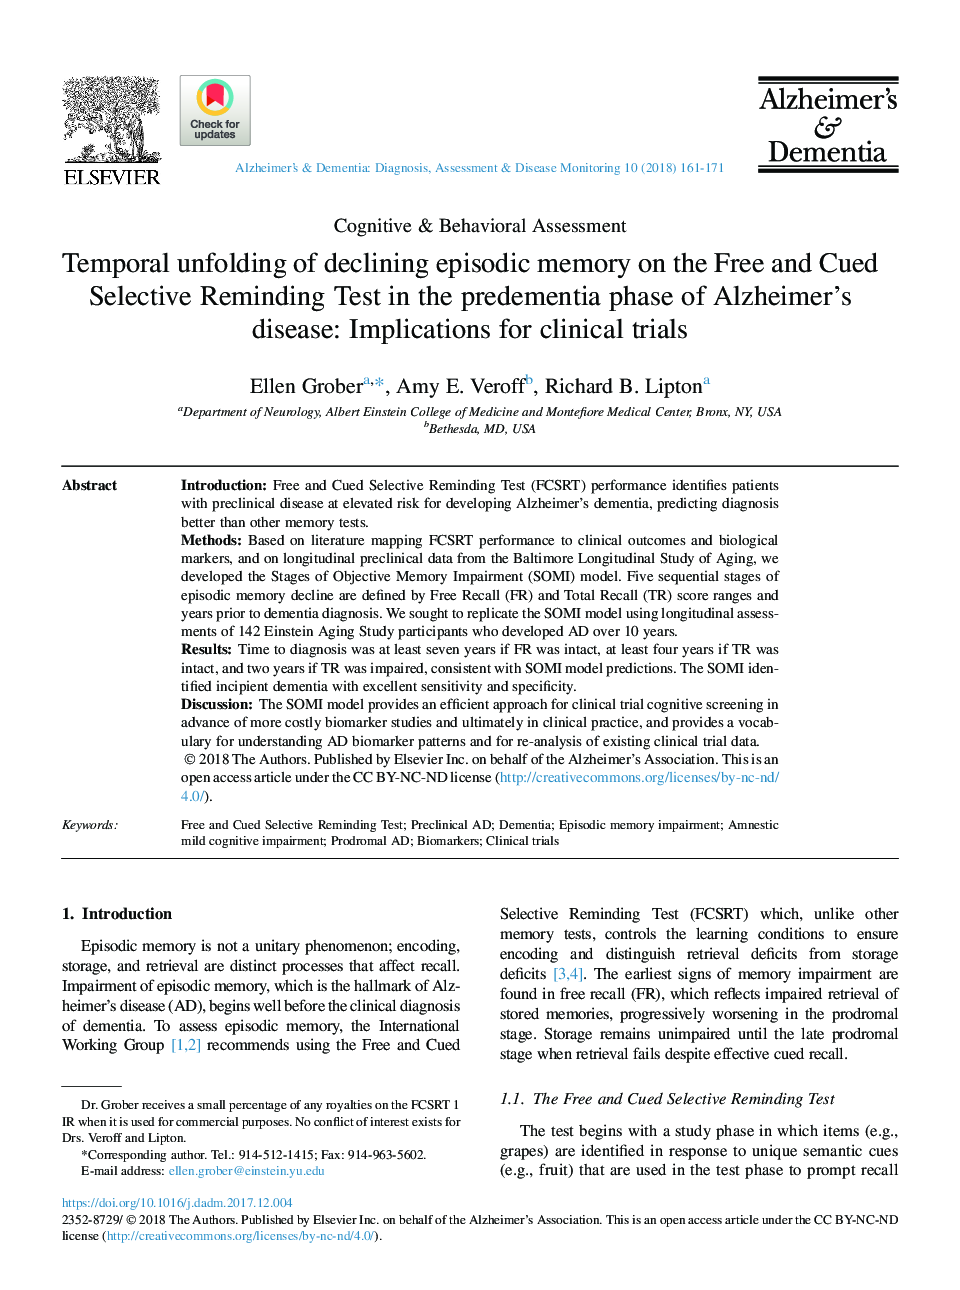 Temporal unfolding of declining episodic memory on the Free and Cued Selective Reminding Test in the predementia phase of Alzheimer's disease: Implications for clinical trials